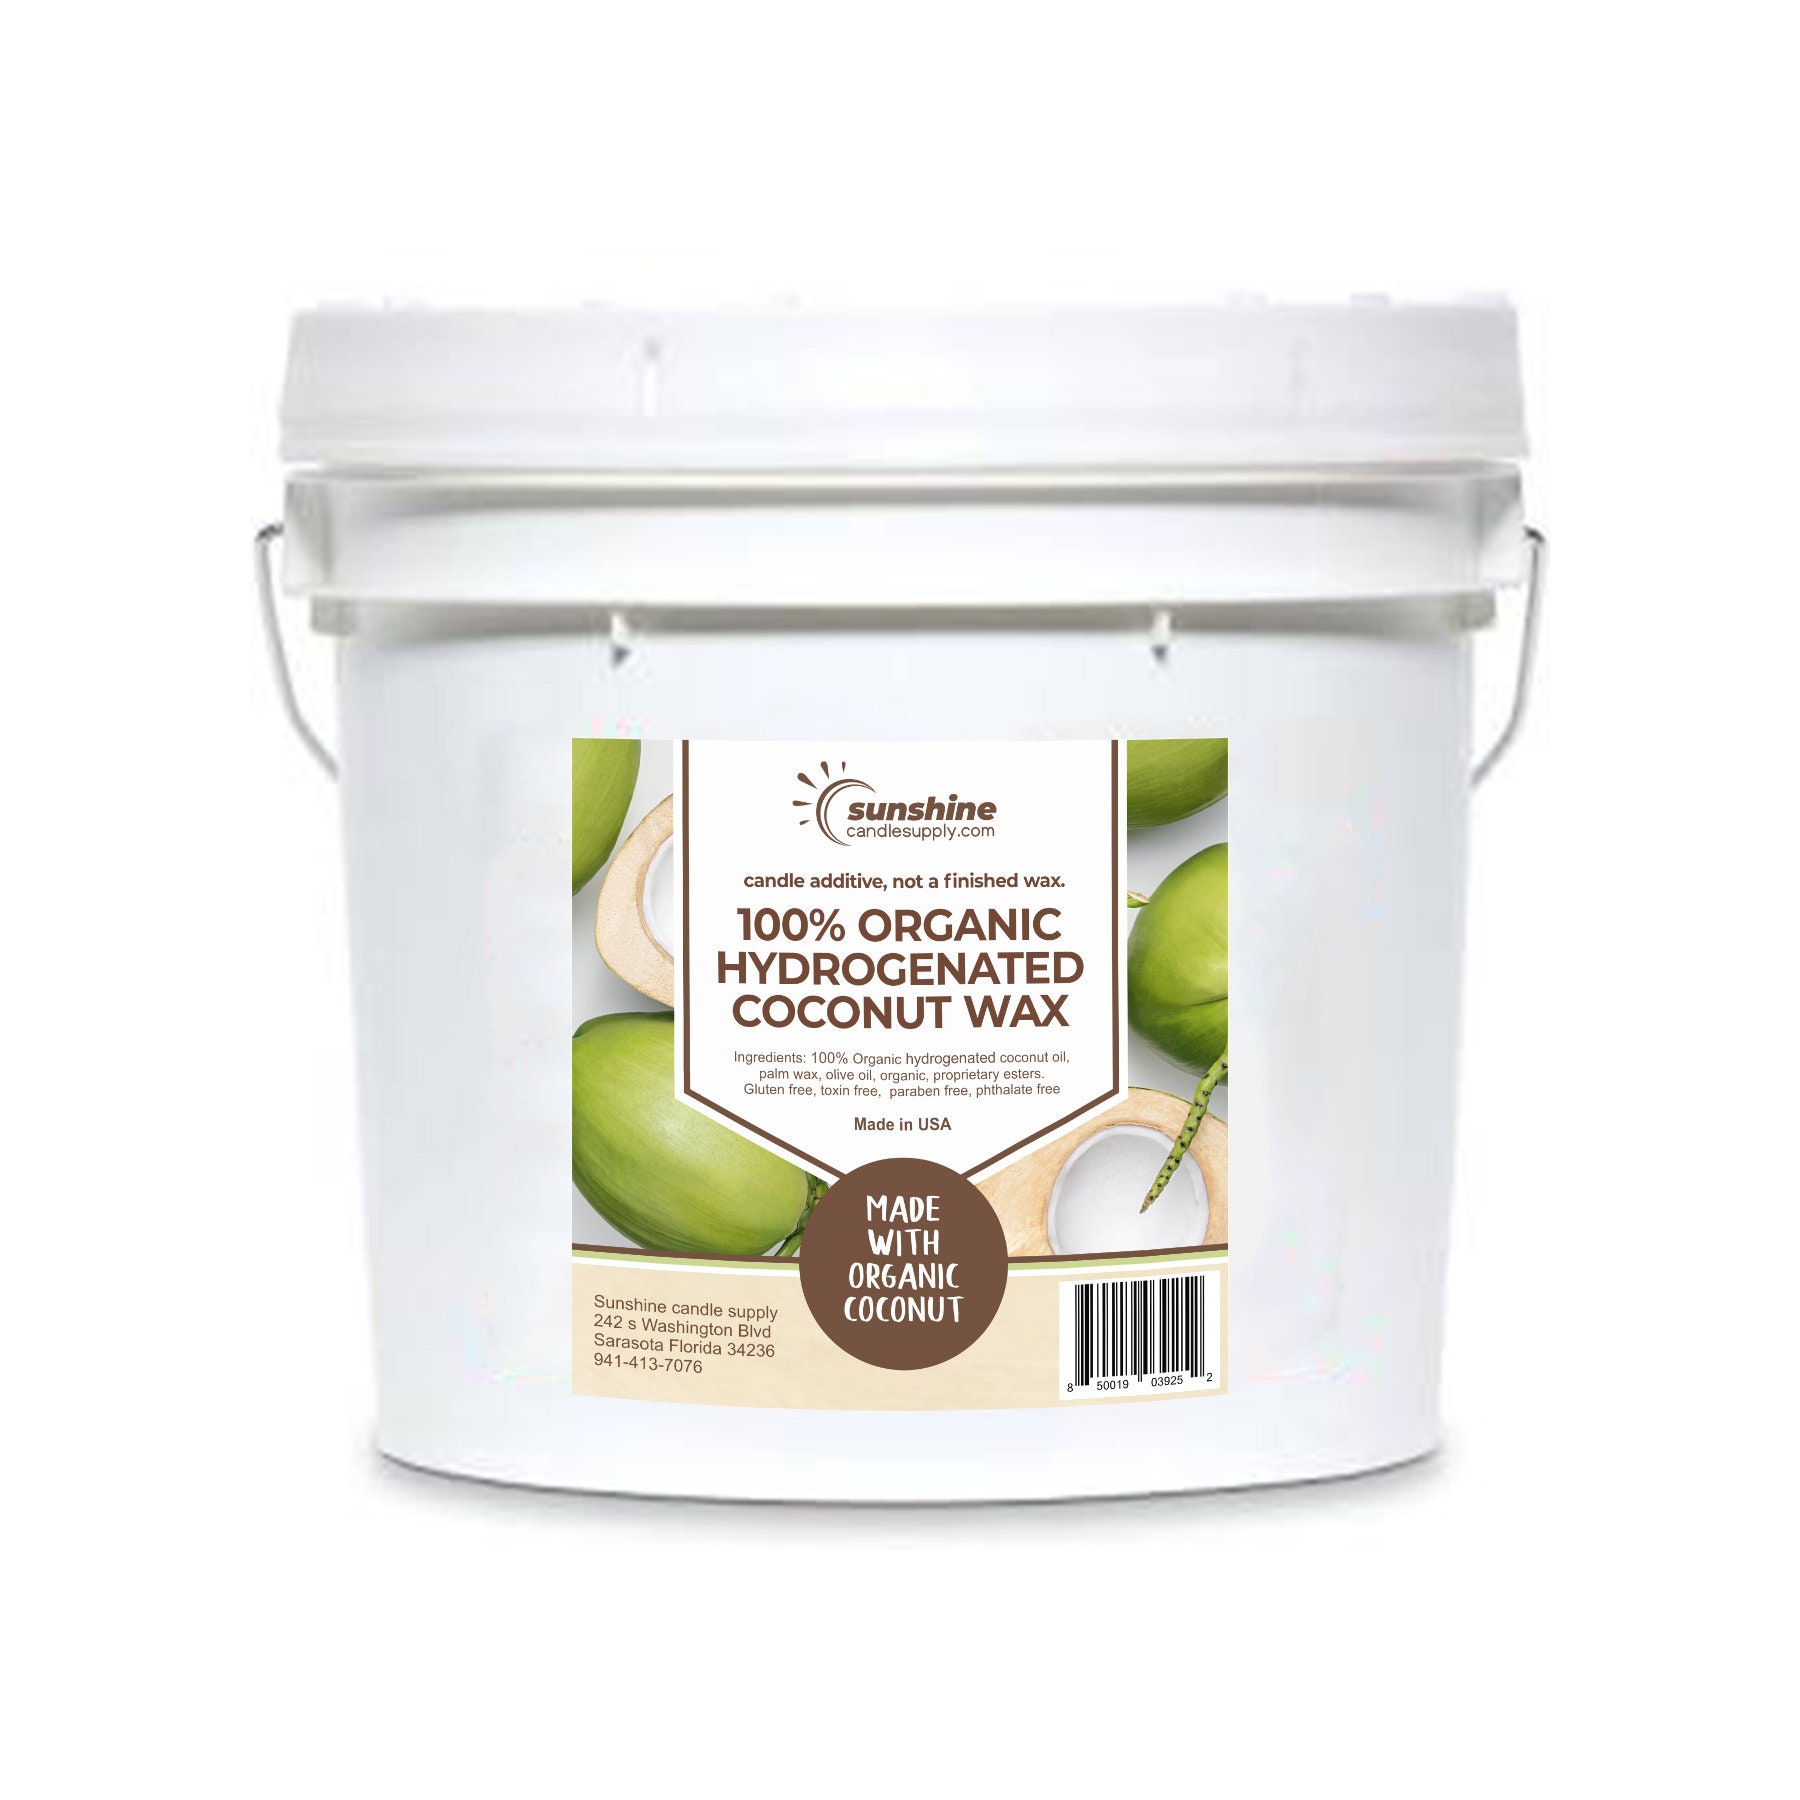 100% Organic Pure Coconut Wax, Nothing Added, Hydrogenated Coconut